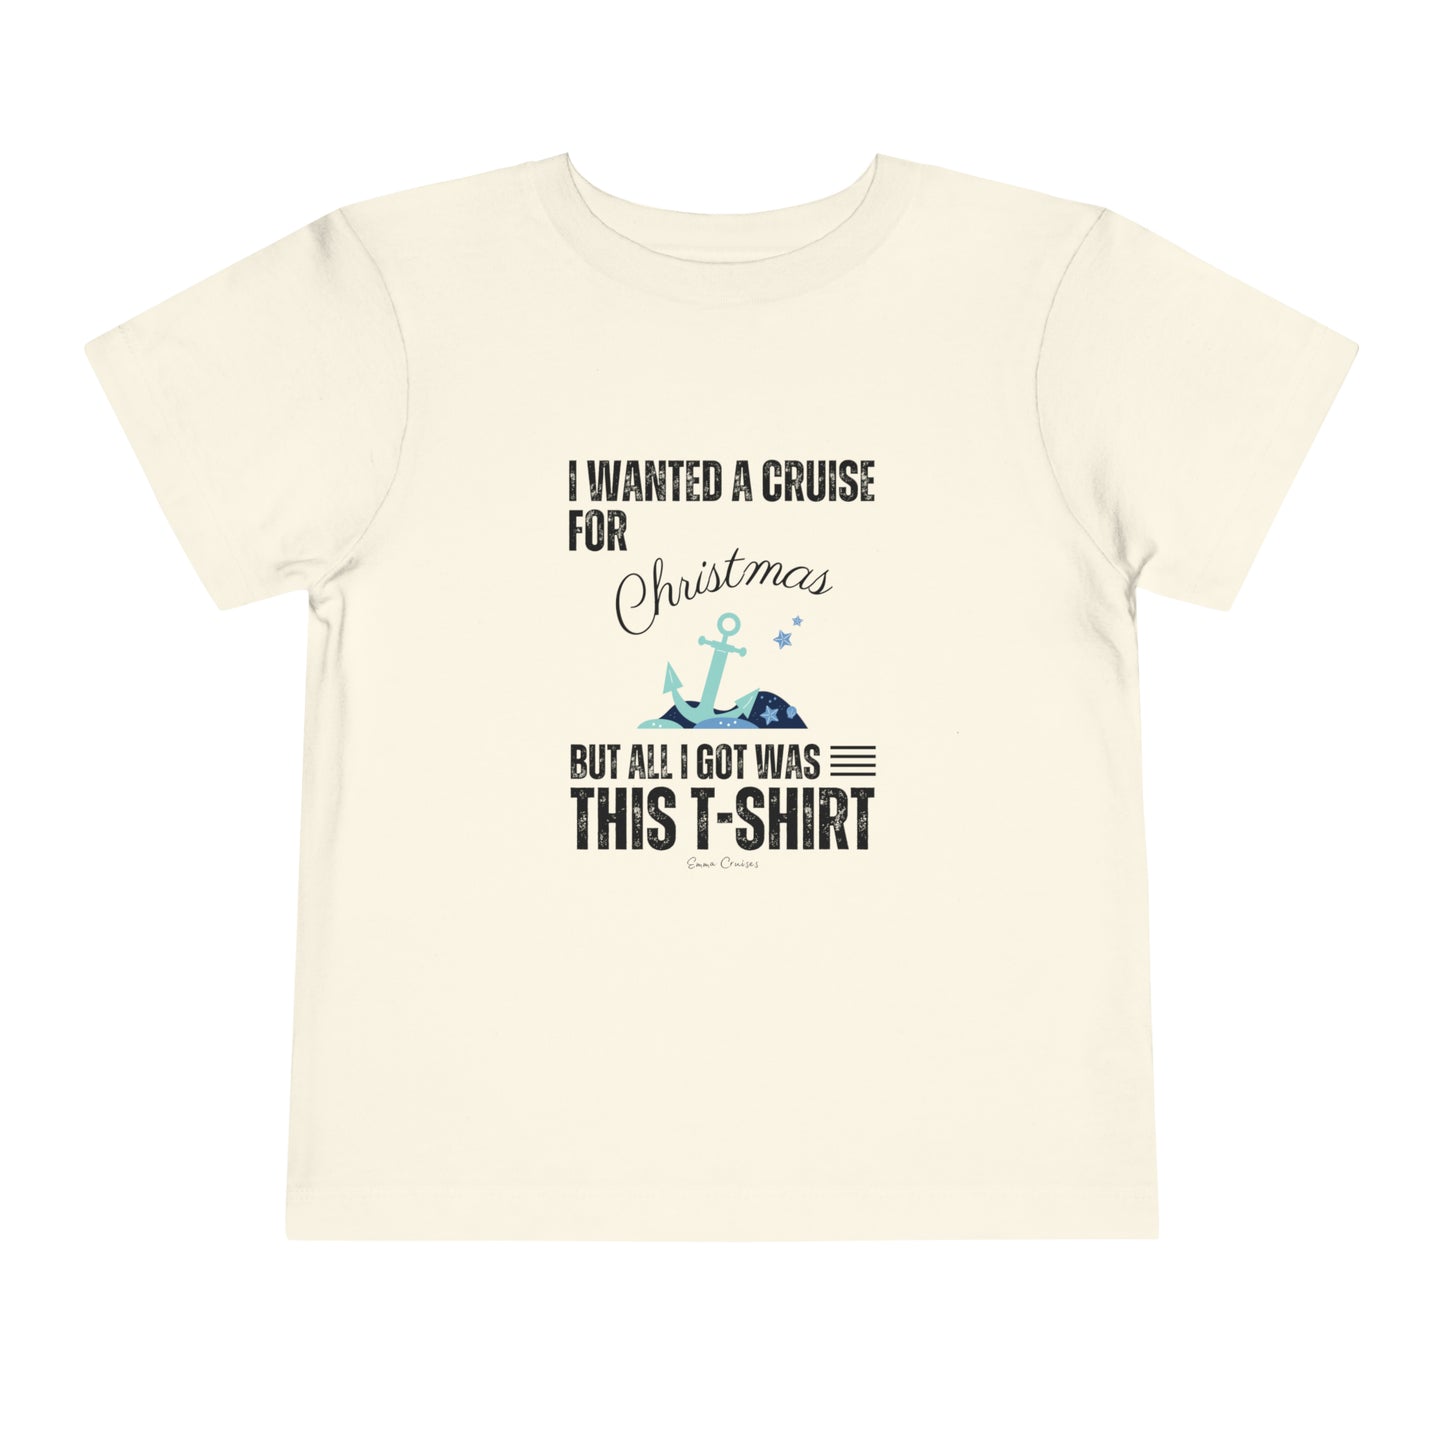 I Wanted a Cruise for Christmas - Toddler UNISEX T-Shirt